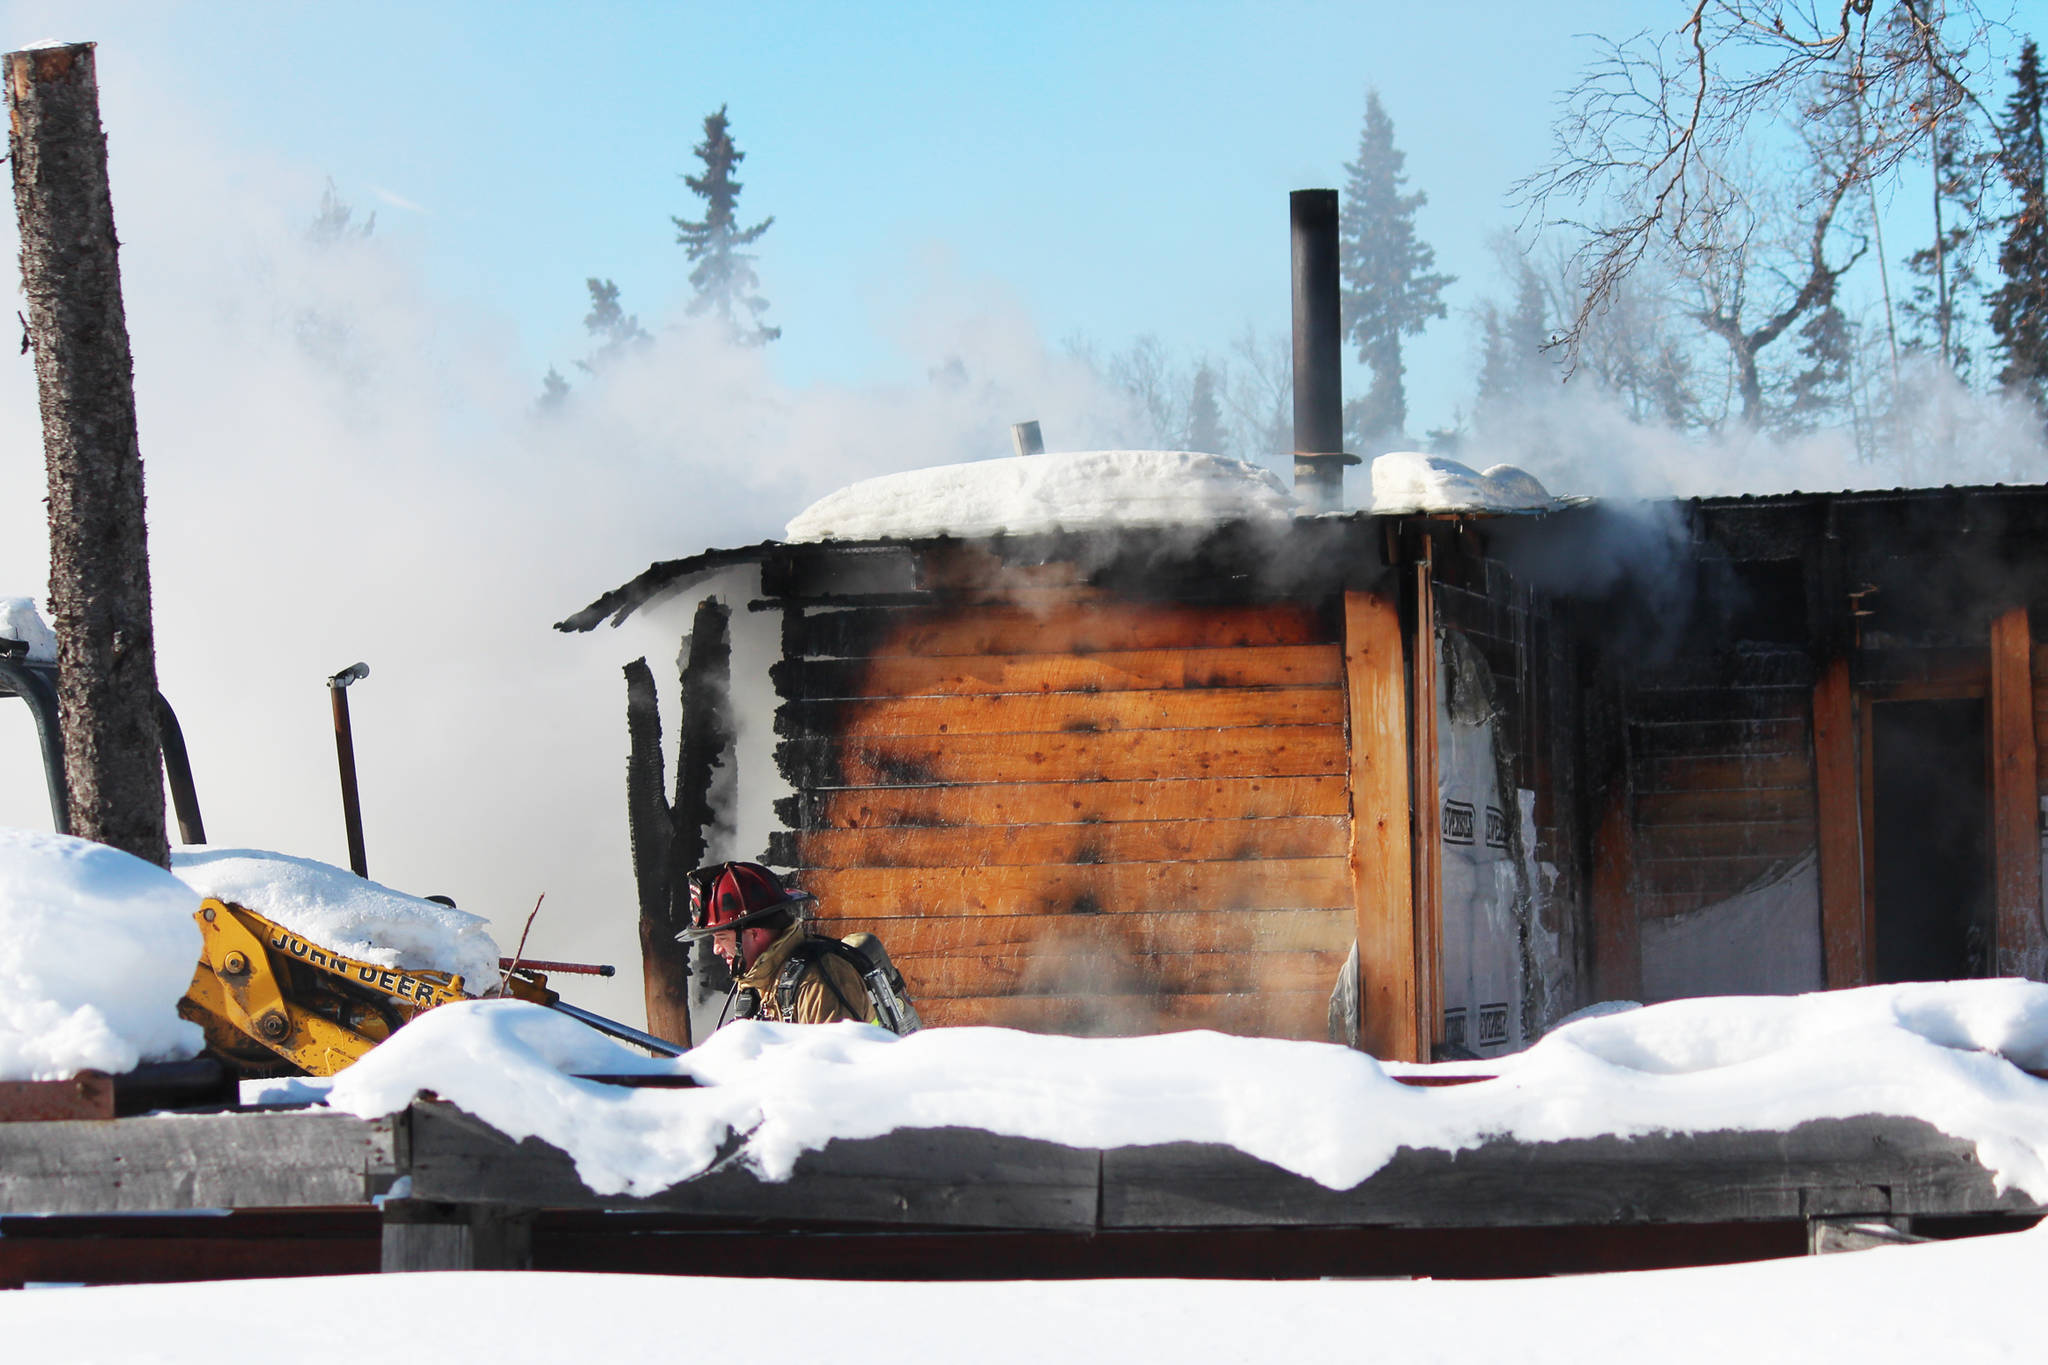 A firefighter walks past a burning house as members of the Nikiski Fire Department work to put out a fire Wednesday, March 1, 2017 on Bastien Drive in Nikiski, Alaska. No one was hurt in the fire, and the Kenai Fire Department provided mutual aid. (Megan Pacer/Peninsula Clarion)